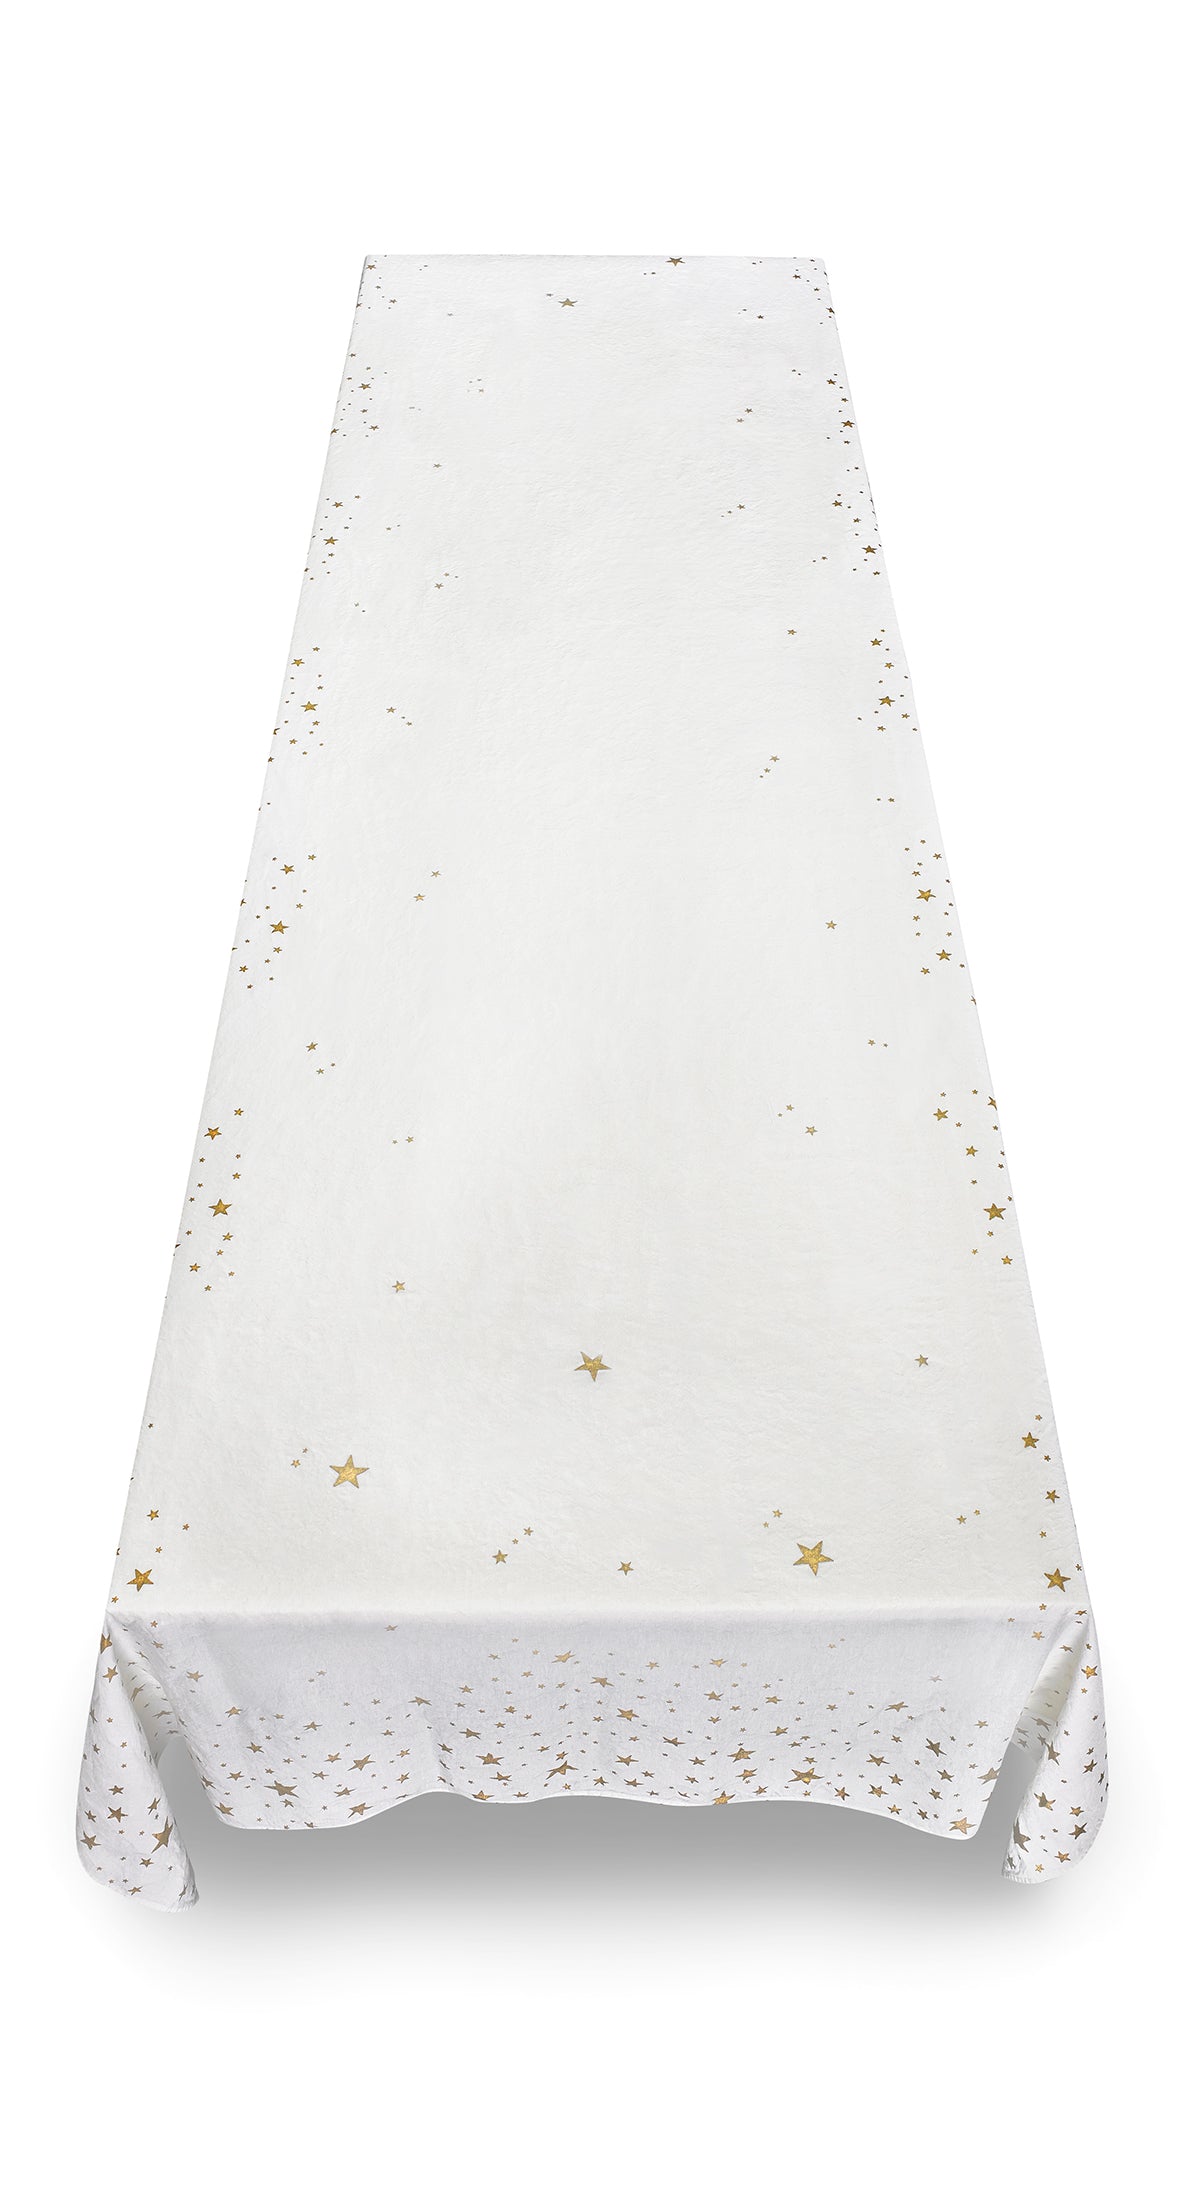 Falling Stars Linen Tablecloth in White with Gold Stars